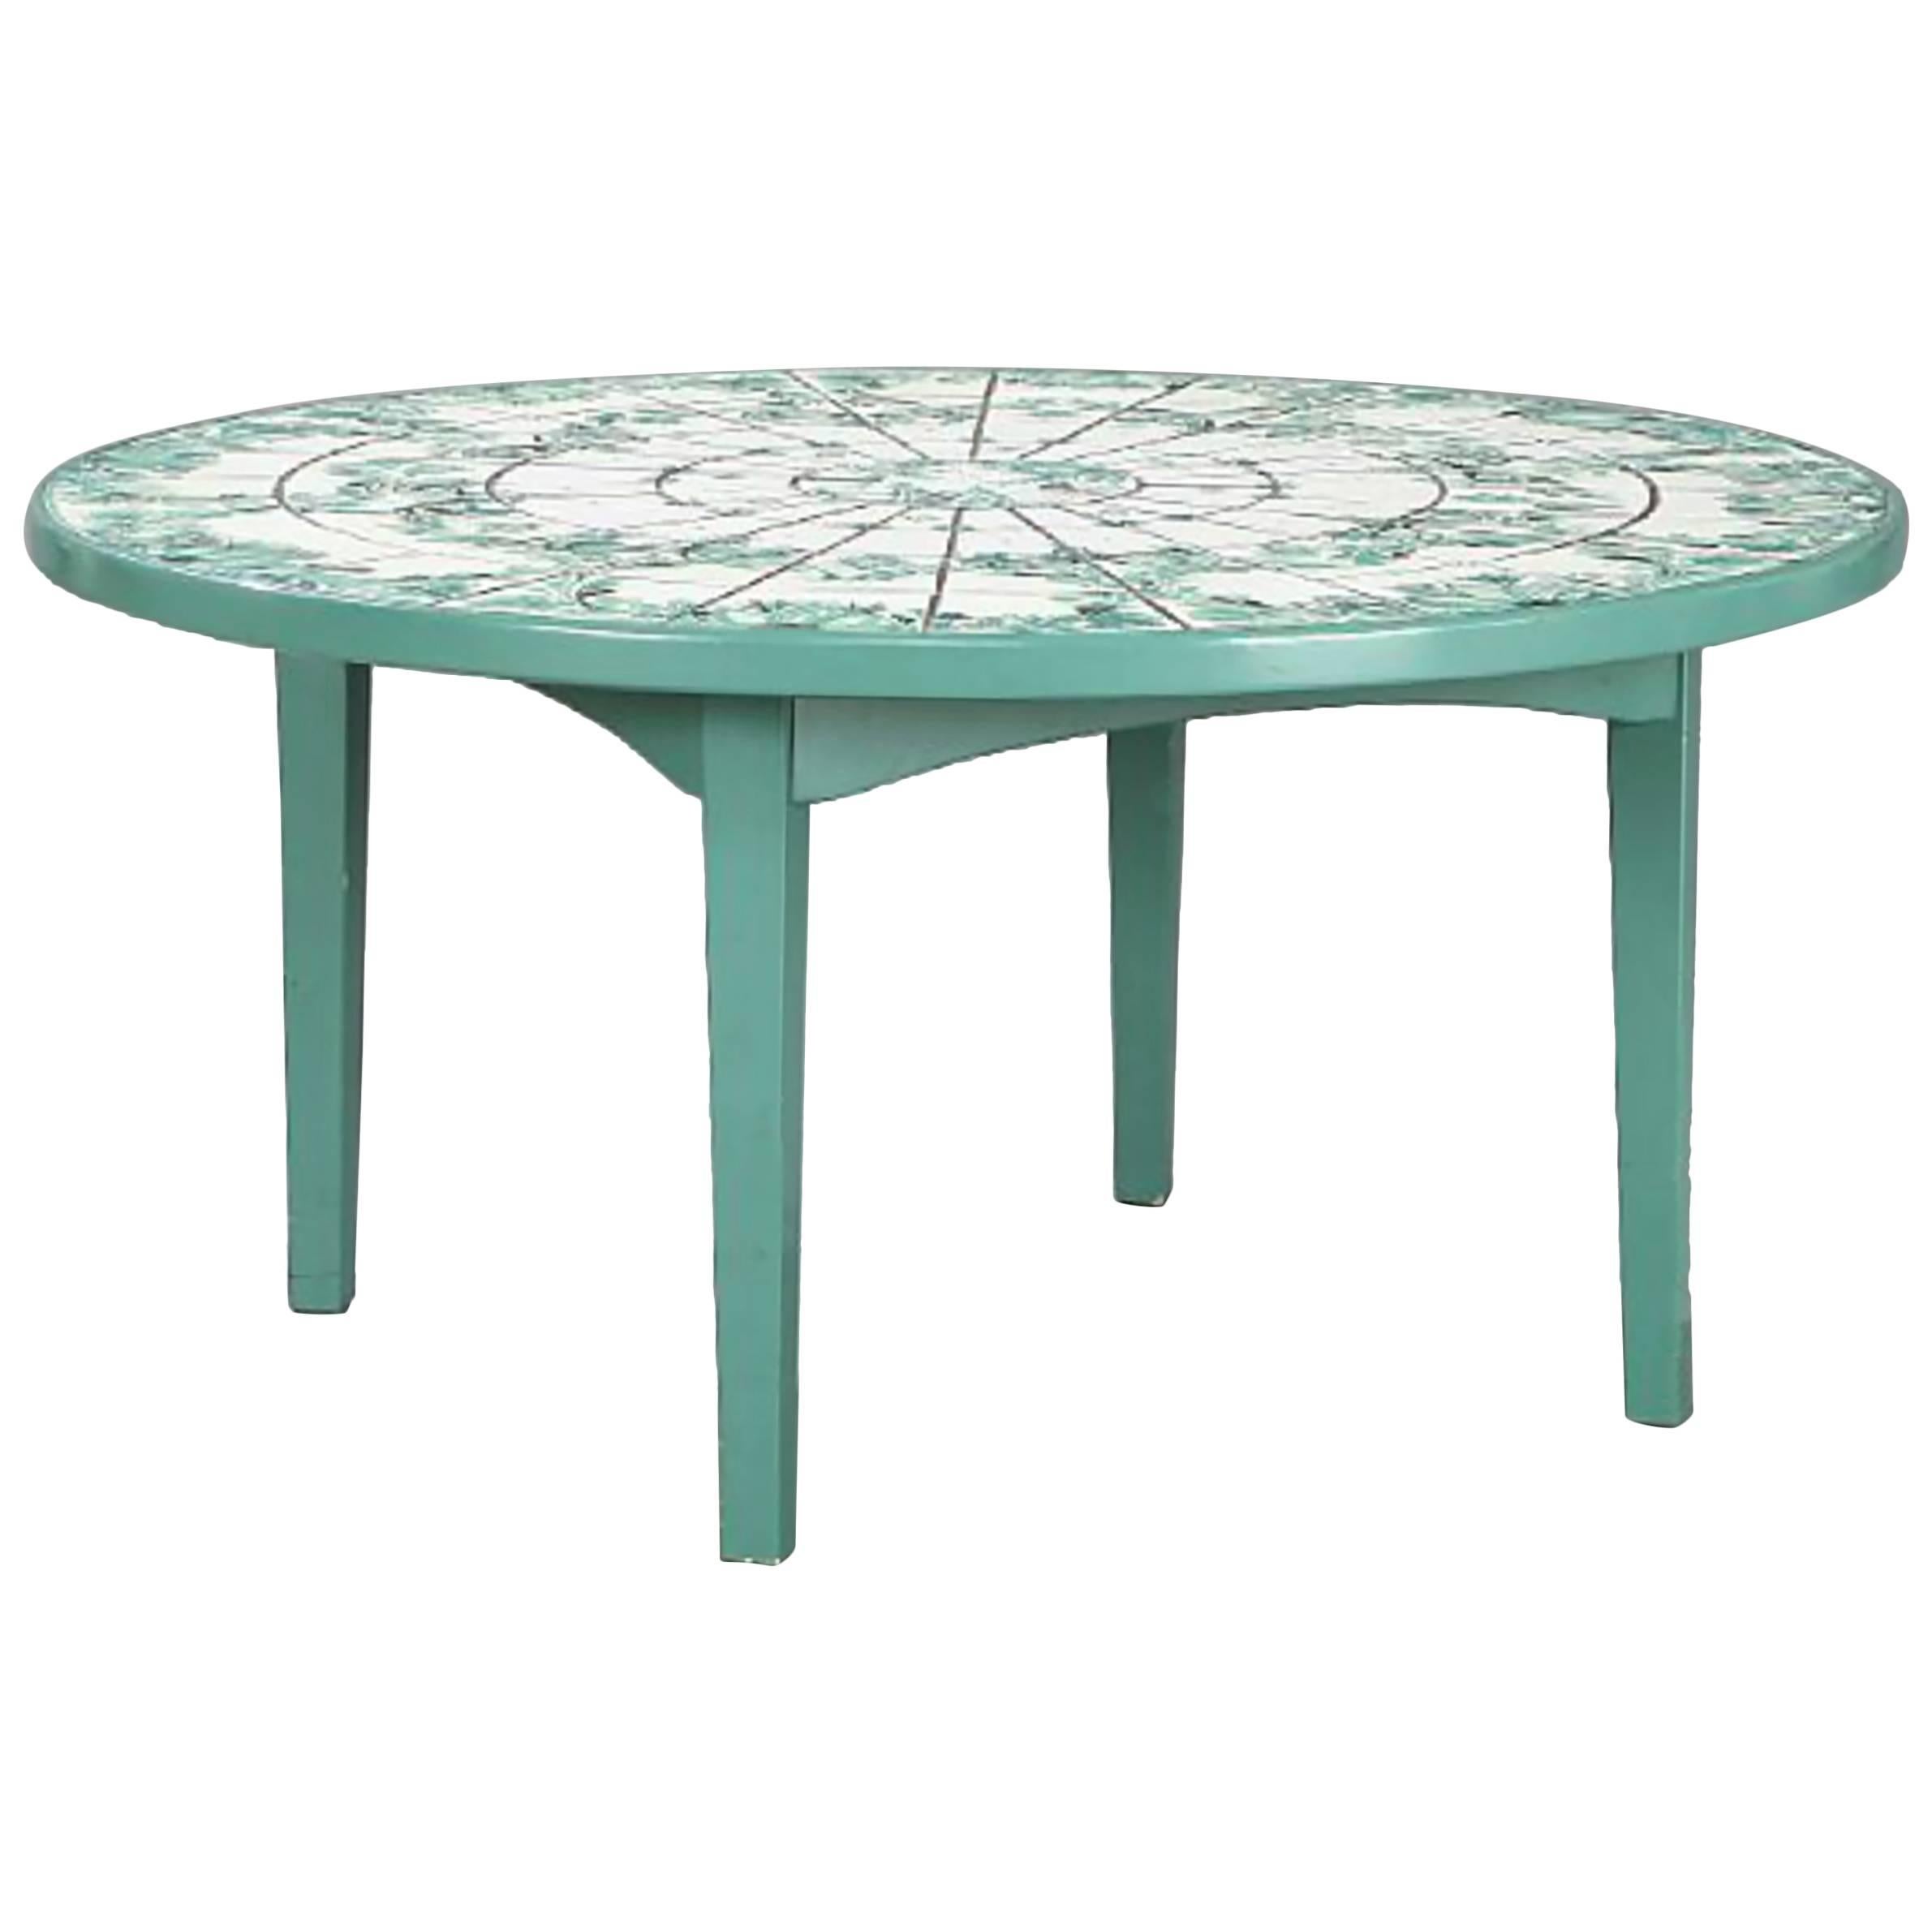 Coffee Table with Ceramic Inlays by Bjorn Wiinblad, Denmark, 1970s For Sale